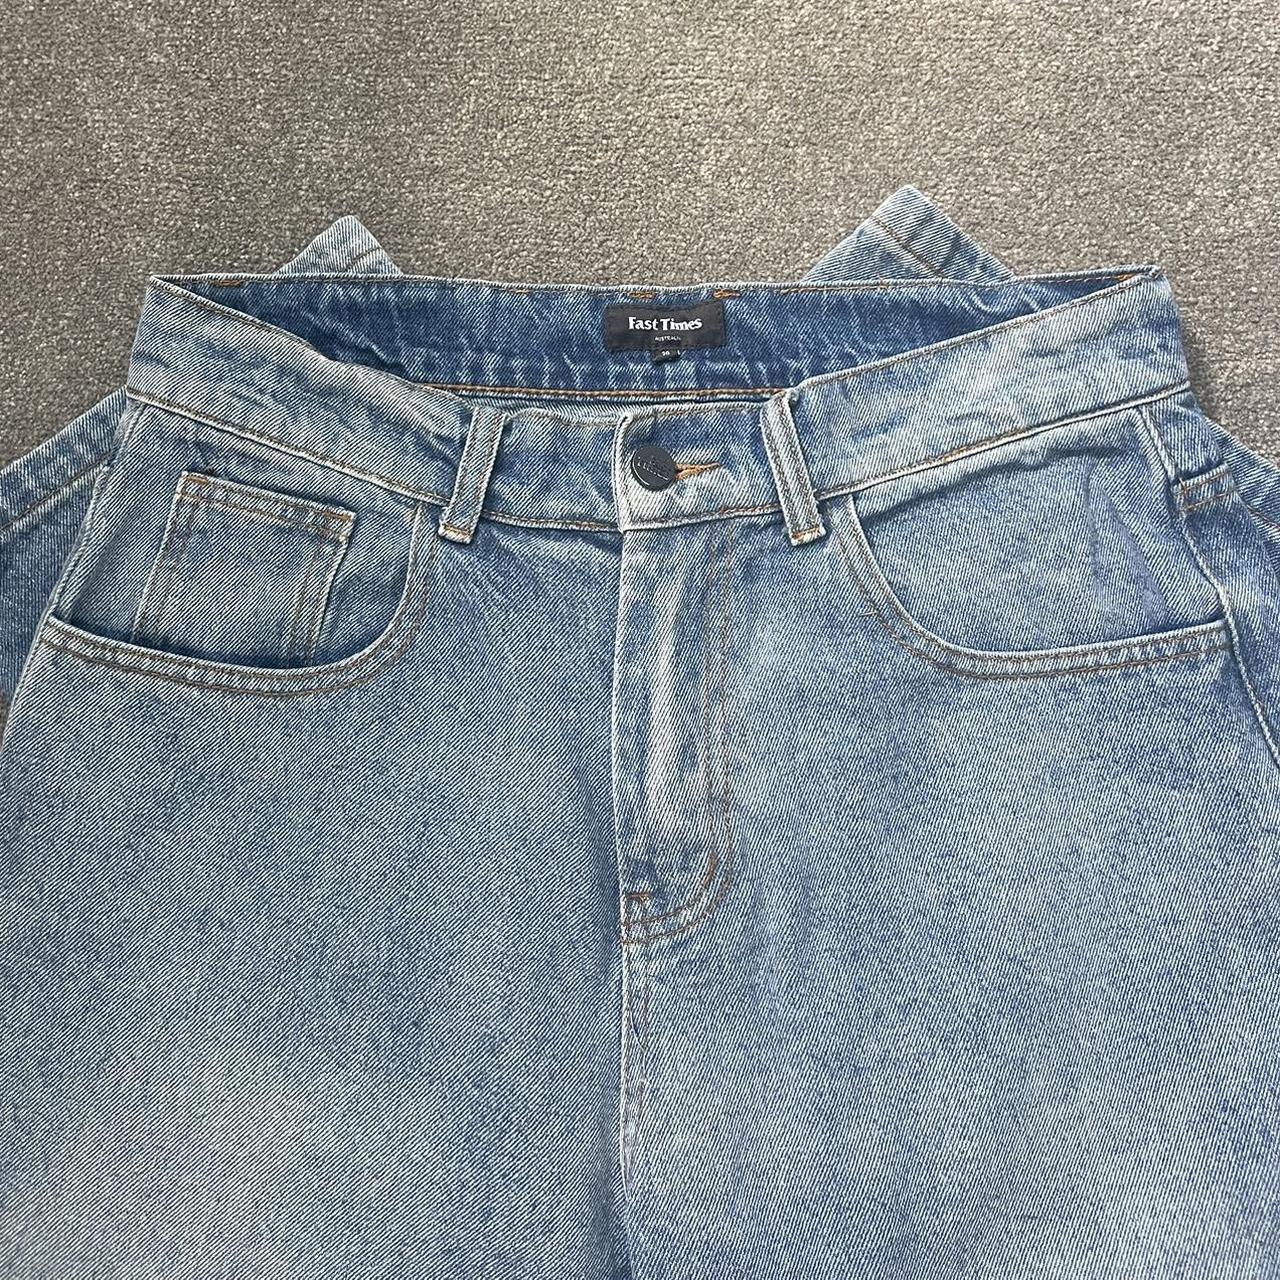 Fast Times Jeans (Relaxed fit) - Size 30 Only been... - Depop